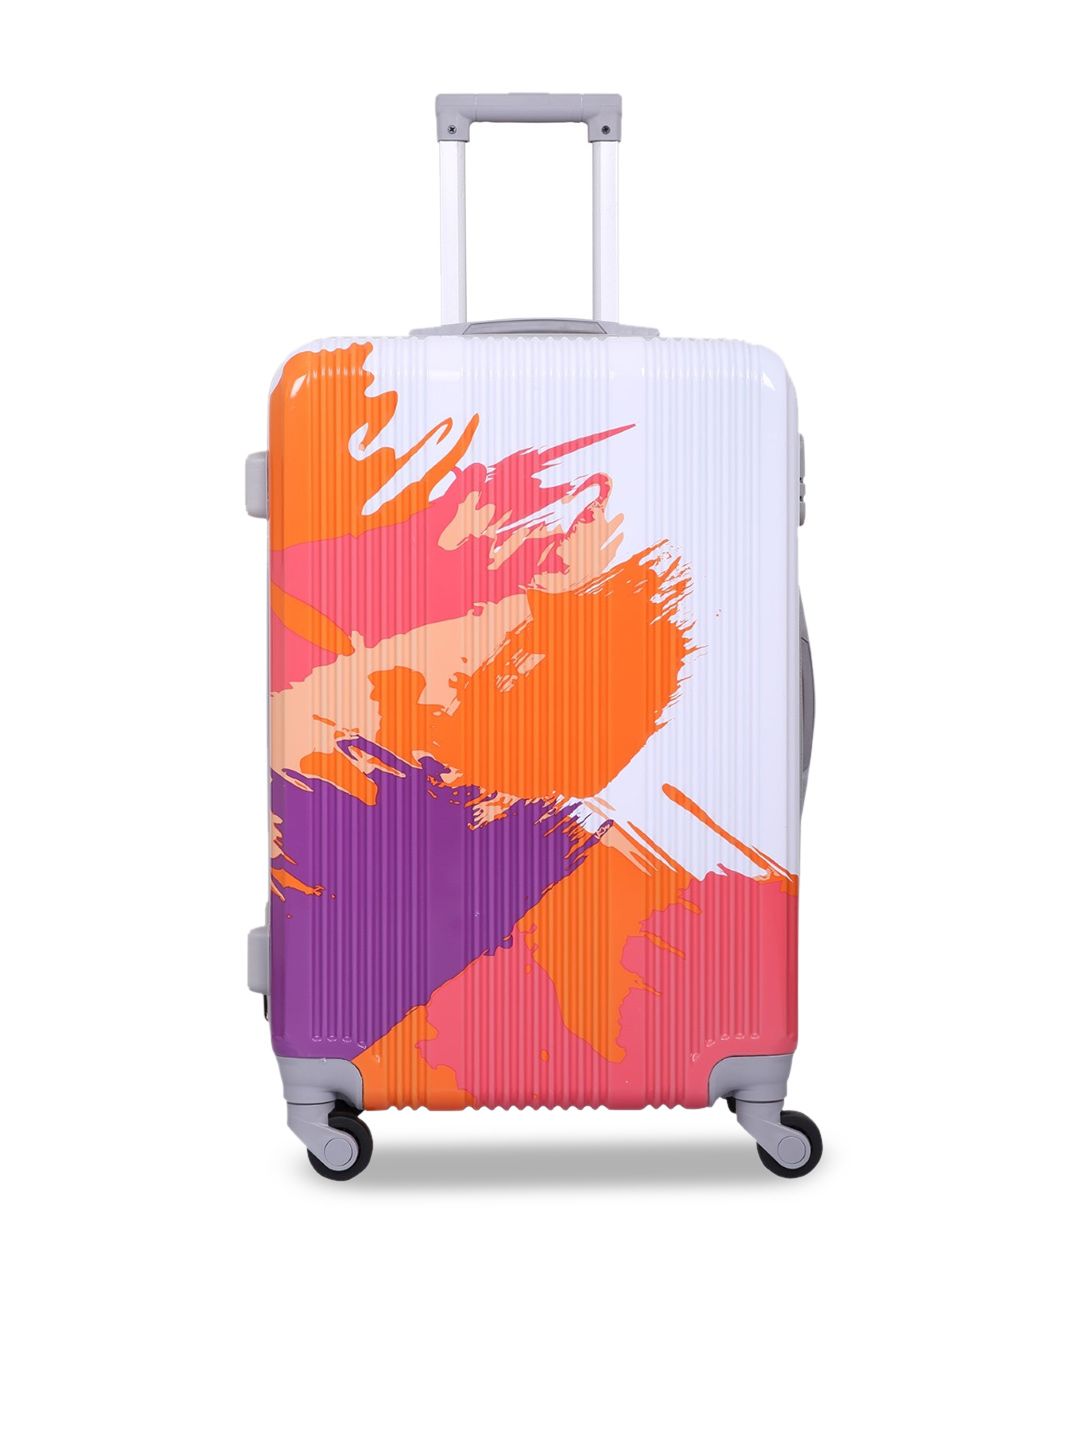 Polo Class Orange Textured Hard-Sided Medium Trolley Suitcase Price in India